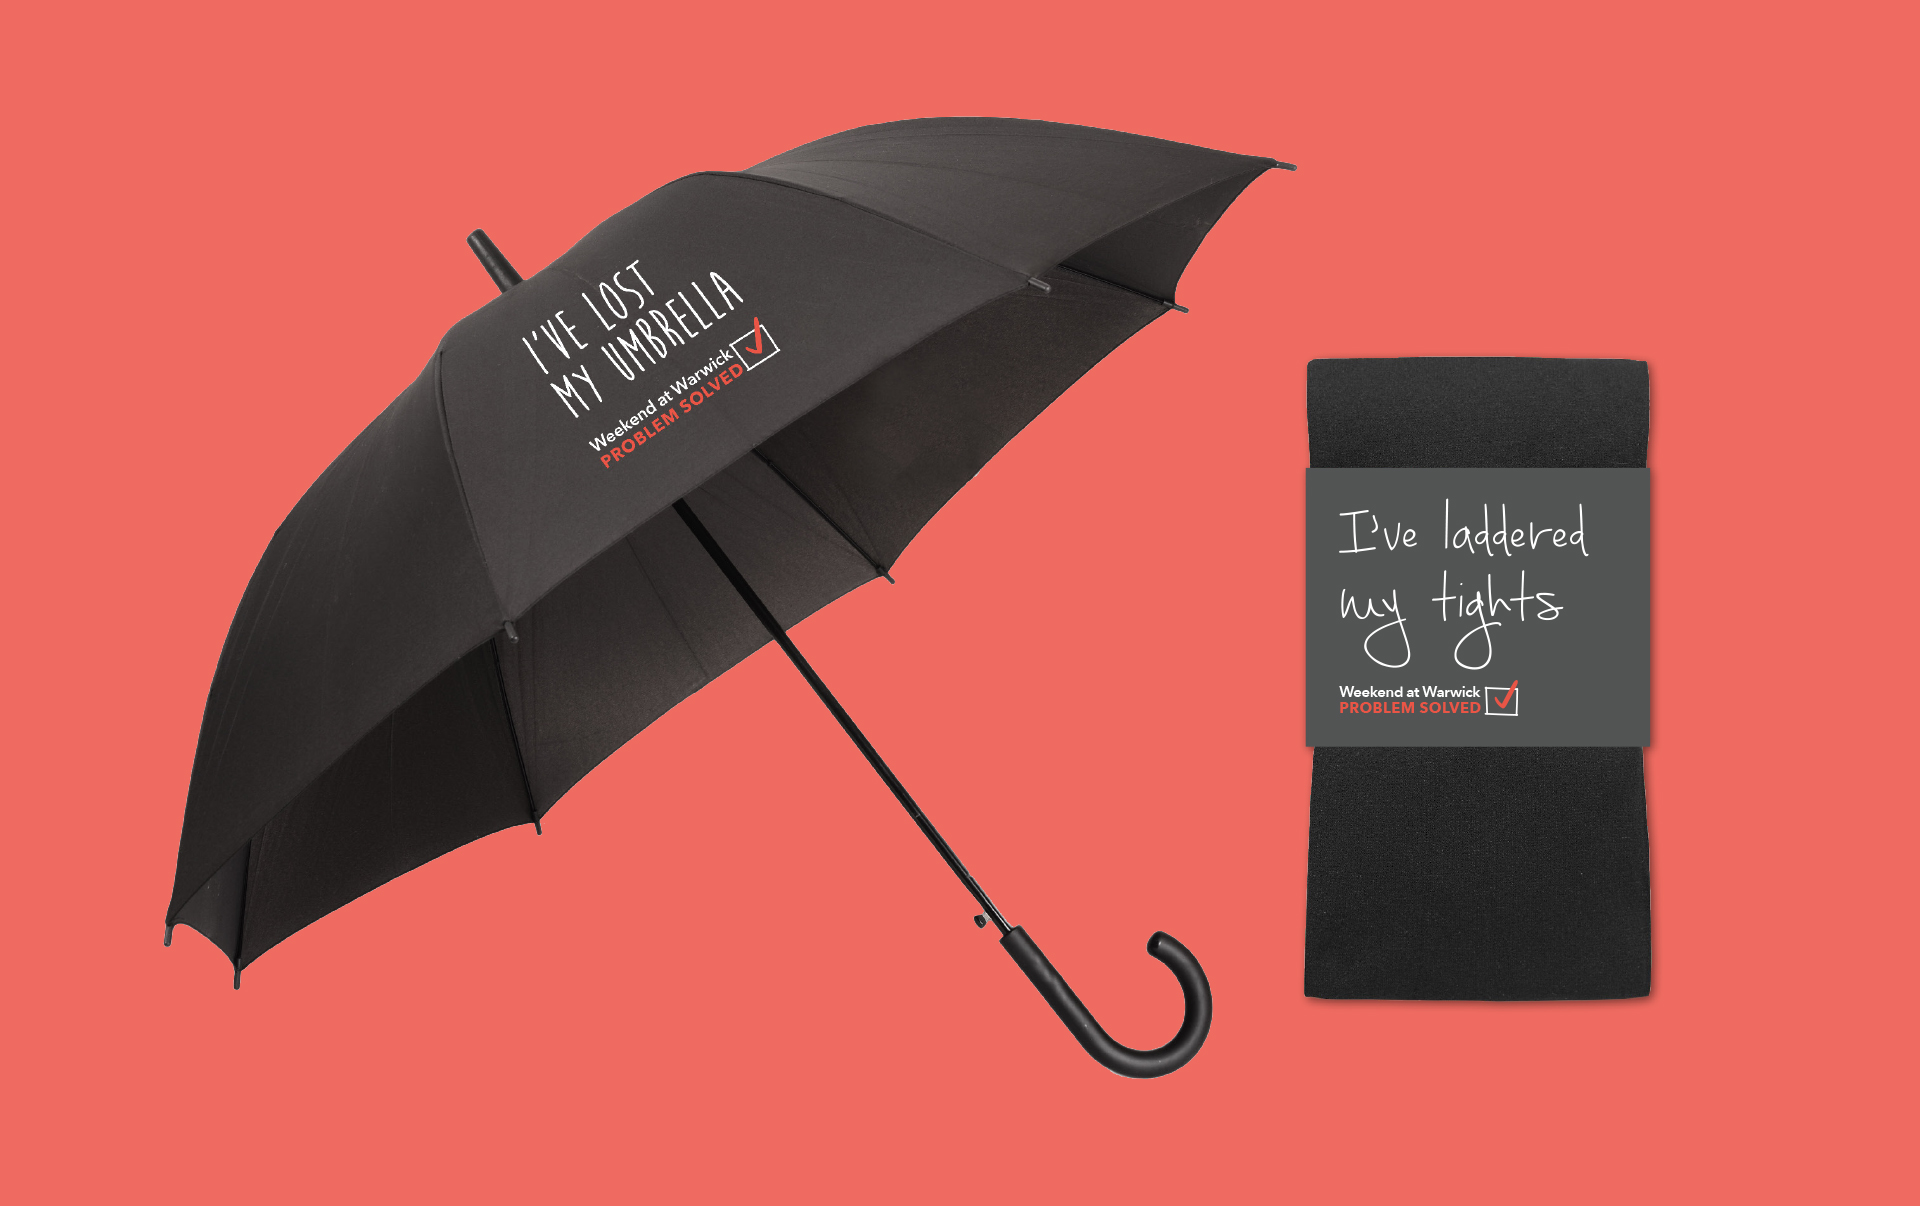 Warwick Conferences branded umbrella and packaging for tights